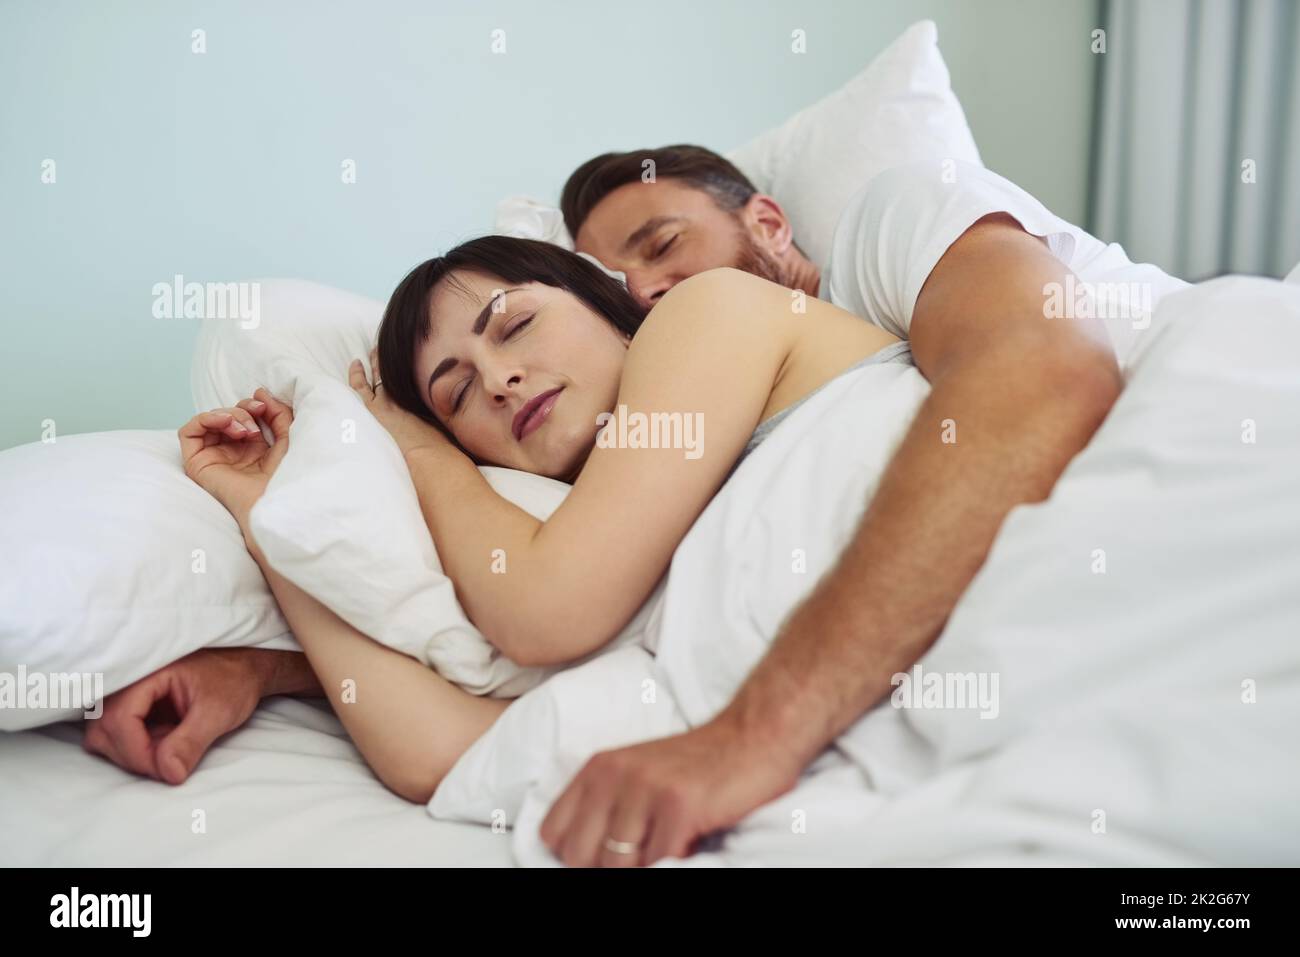 Too comfortable to get out of bed. Shot of a relaxed young couple sleeping in each others arms in bed during morning hours. Stock Photo